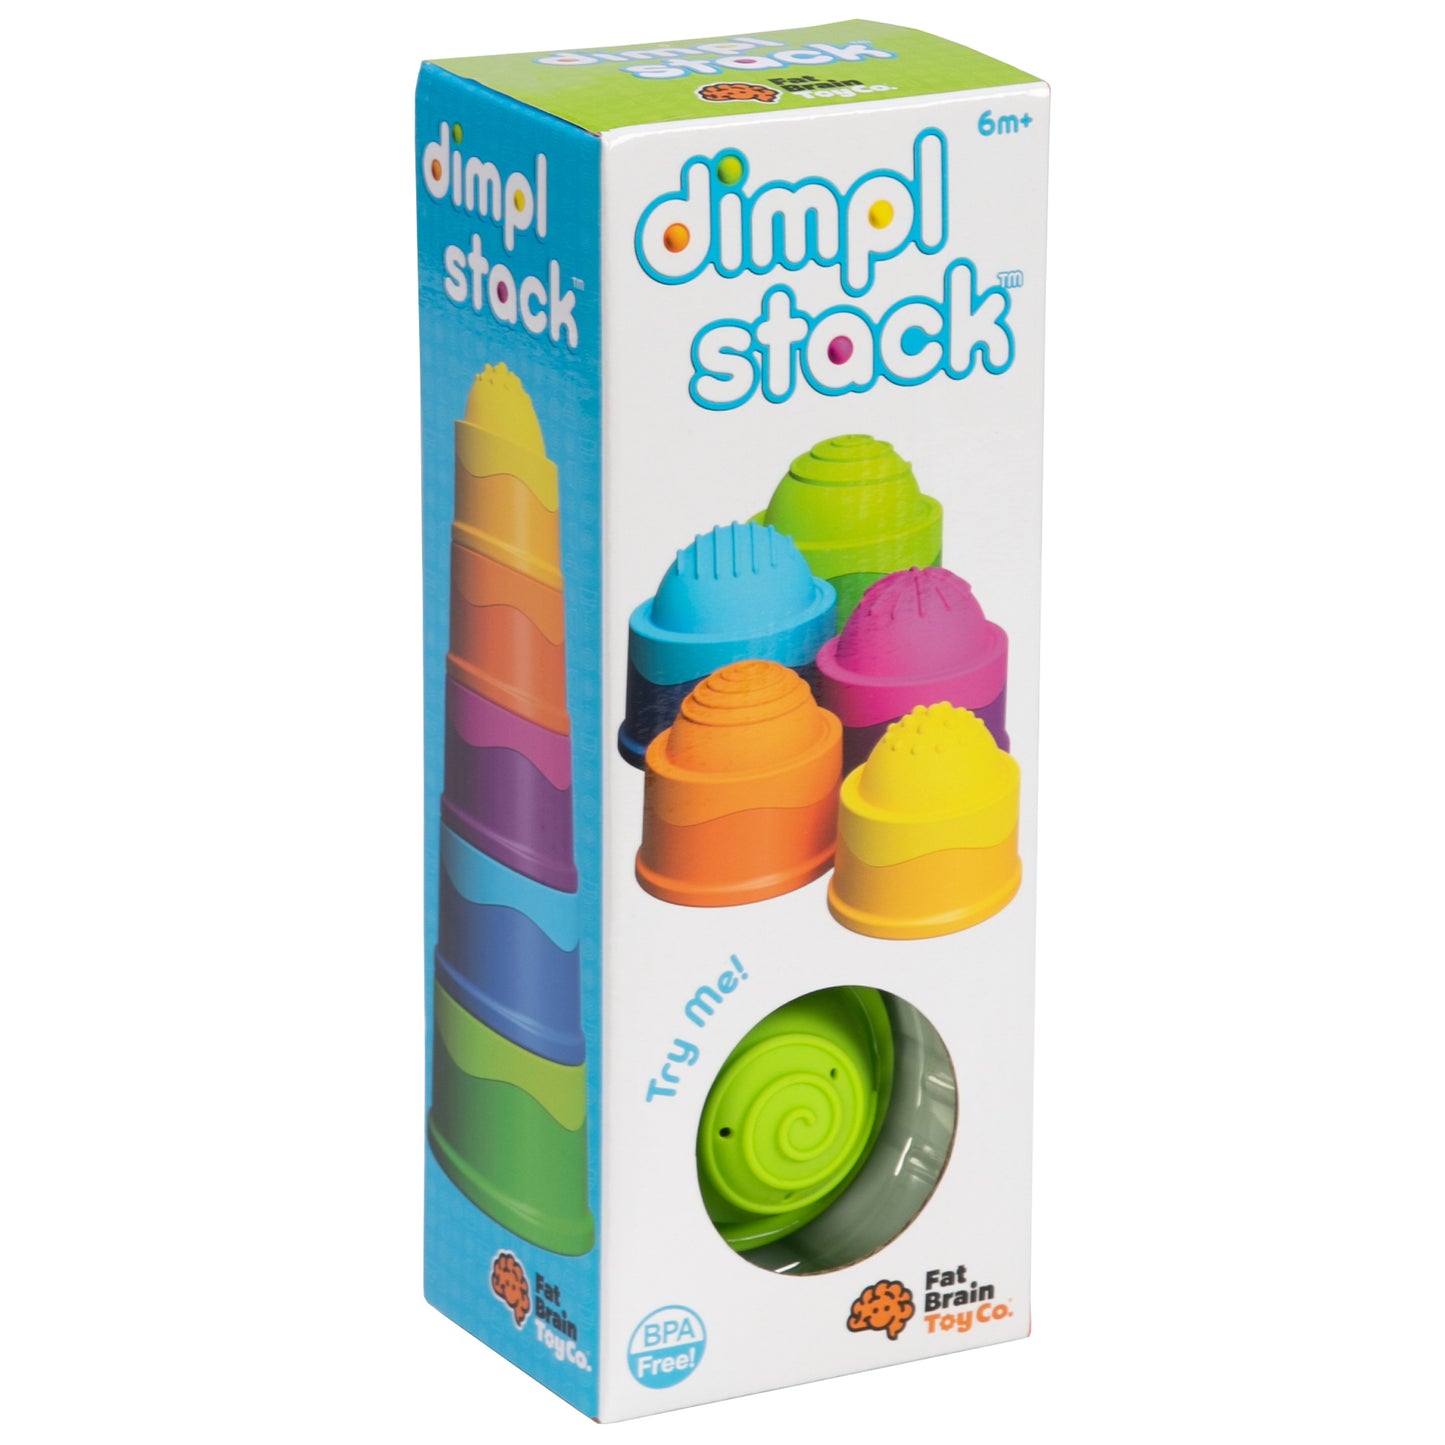 Dimpl Stack - Fat Brain Toys